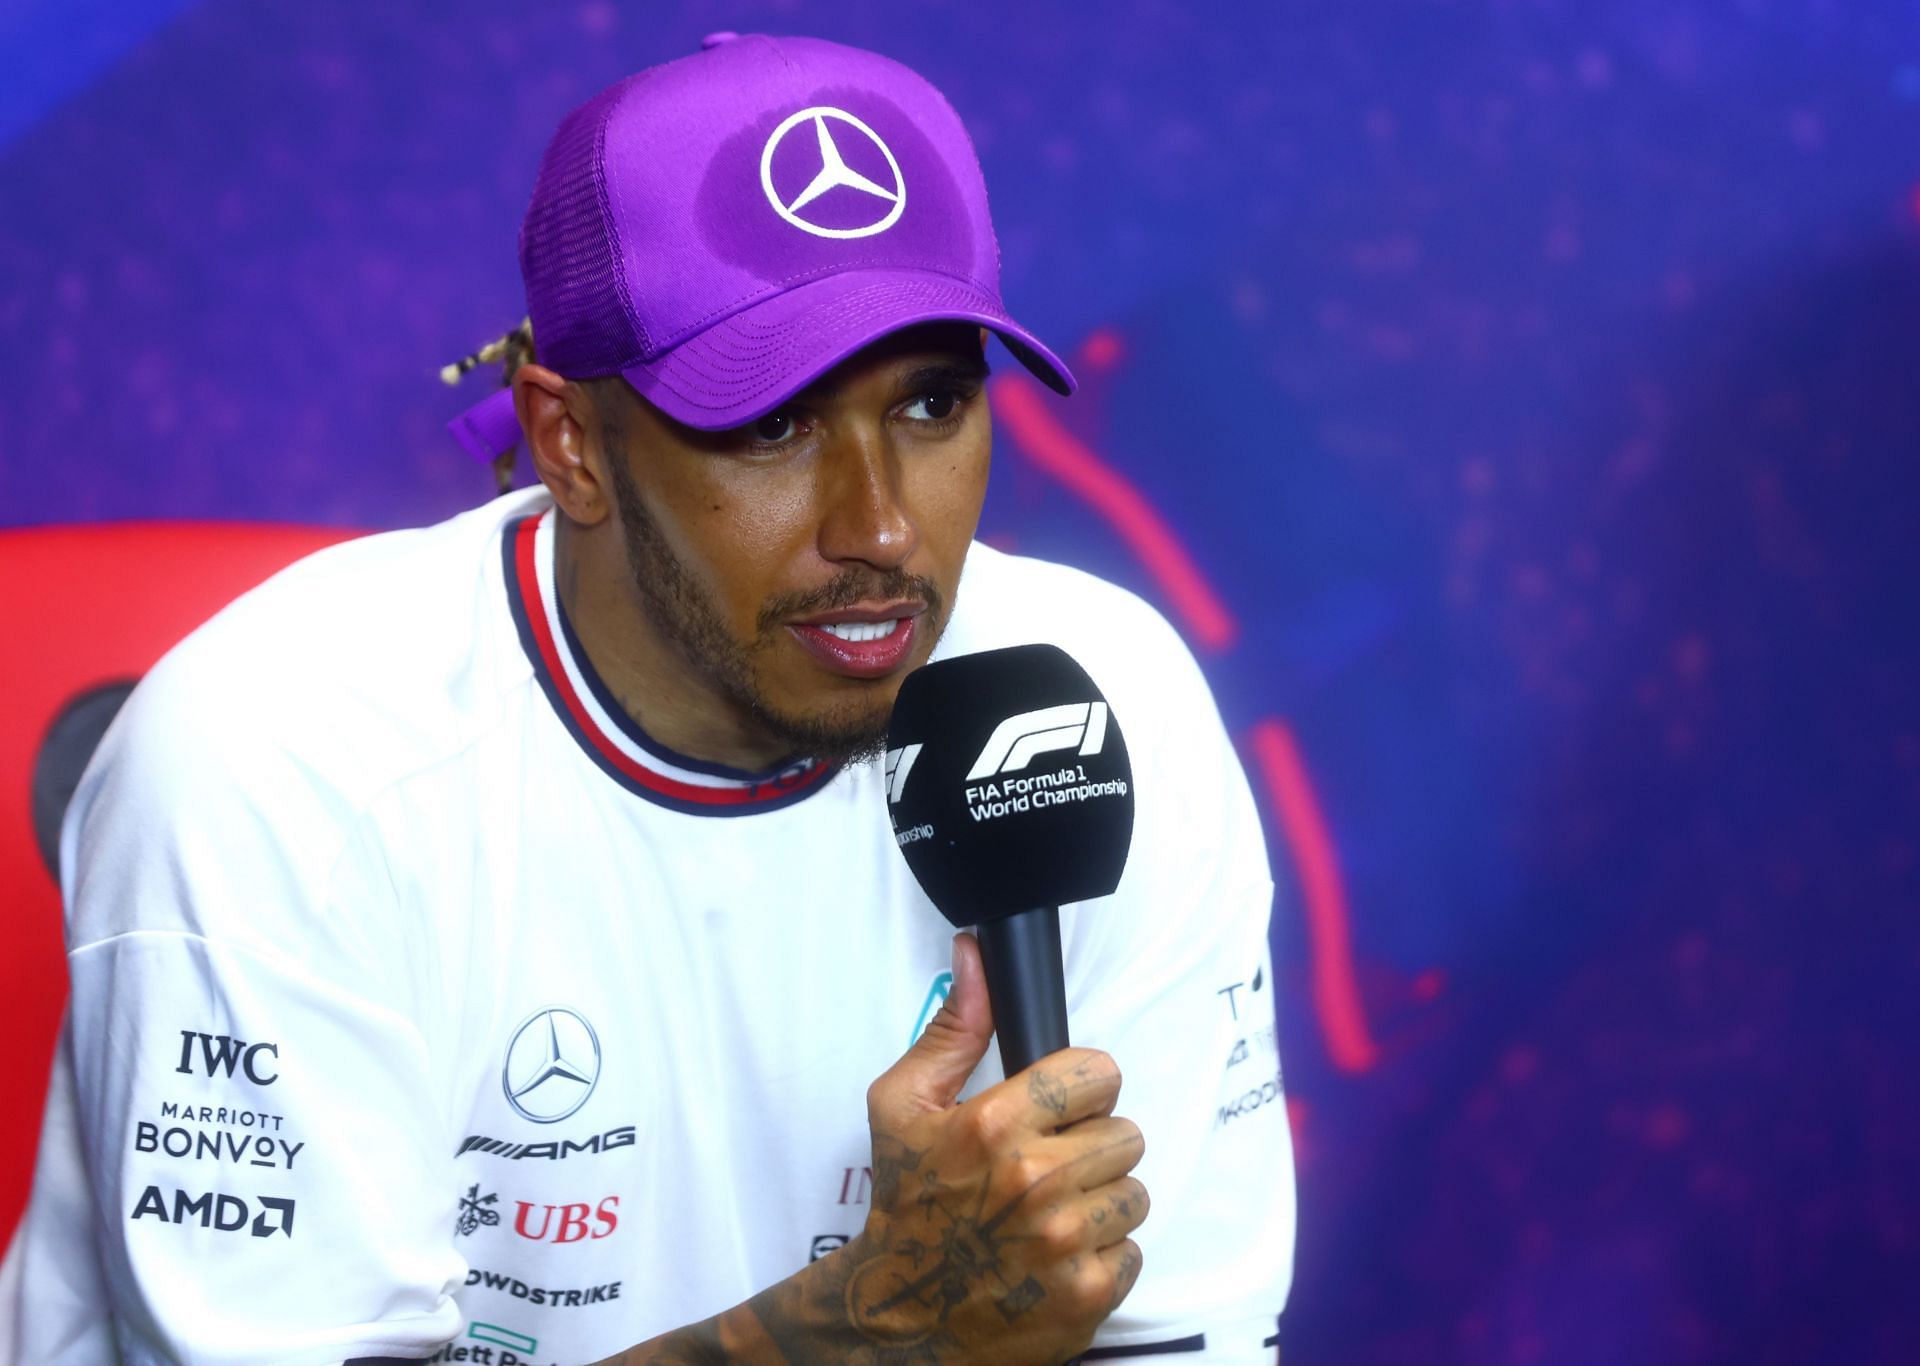 Lewis Hamilton attends the press conference after the F1 Grand Prix of France at Circuit Paul Ricard on July 24, 2022 in Le Castellet, France. (Photo by Dan Istitene/Getty Images)